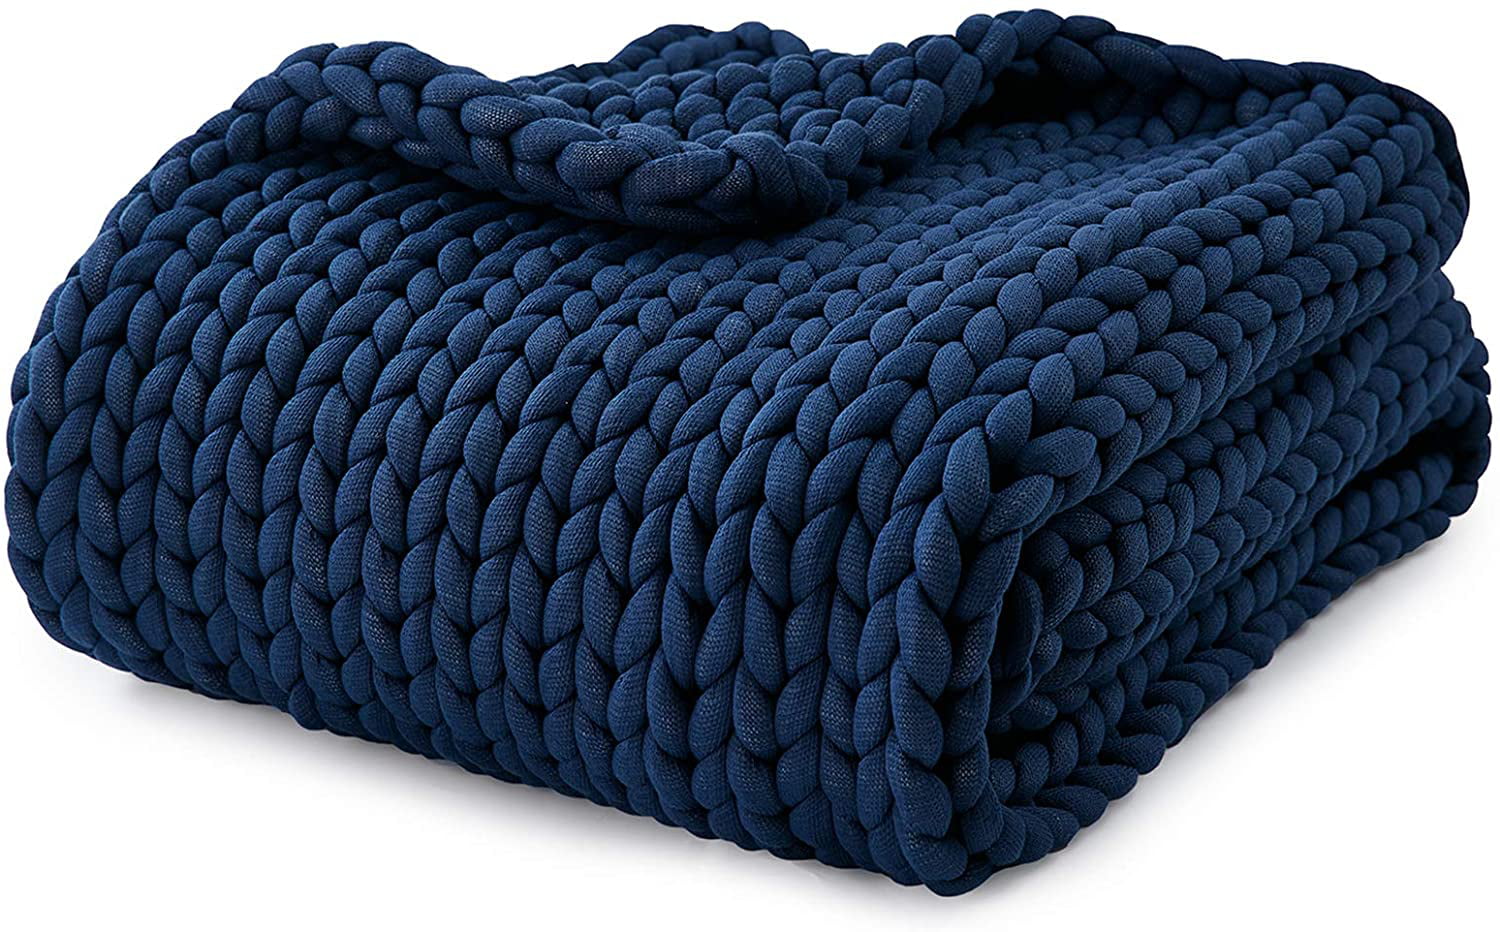 YnM Velvet Knitted Weighted Blanket, Hand Made Chunky Knit Weighted